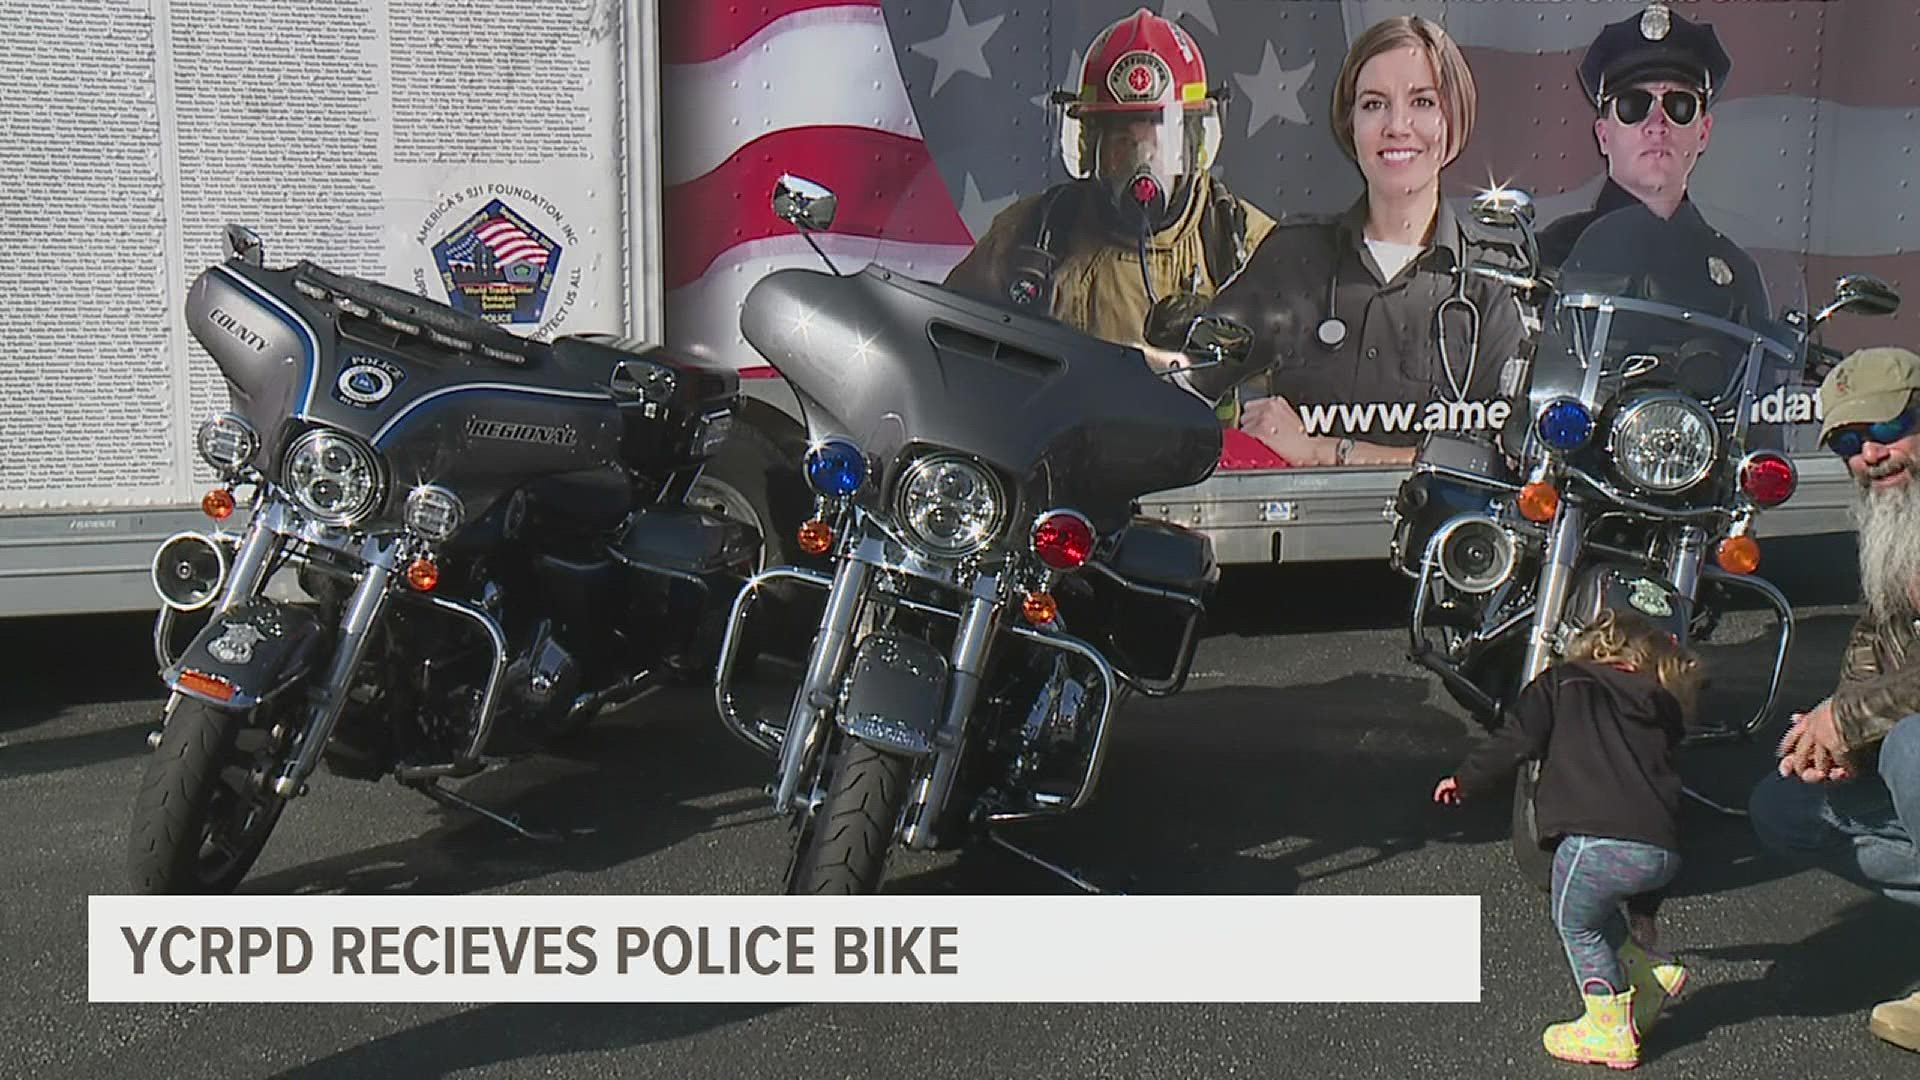 The York County Regional Police Department won the bike during America's 911 Foundation 9/11 ride last August.